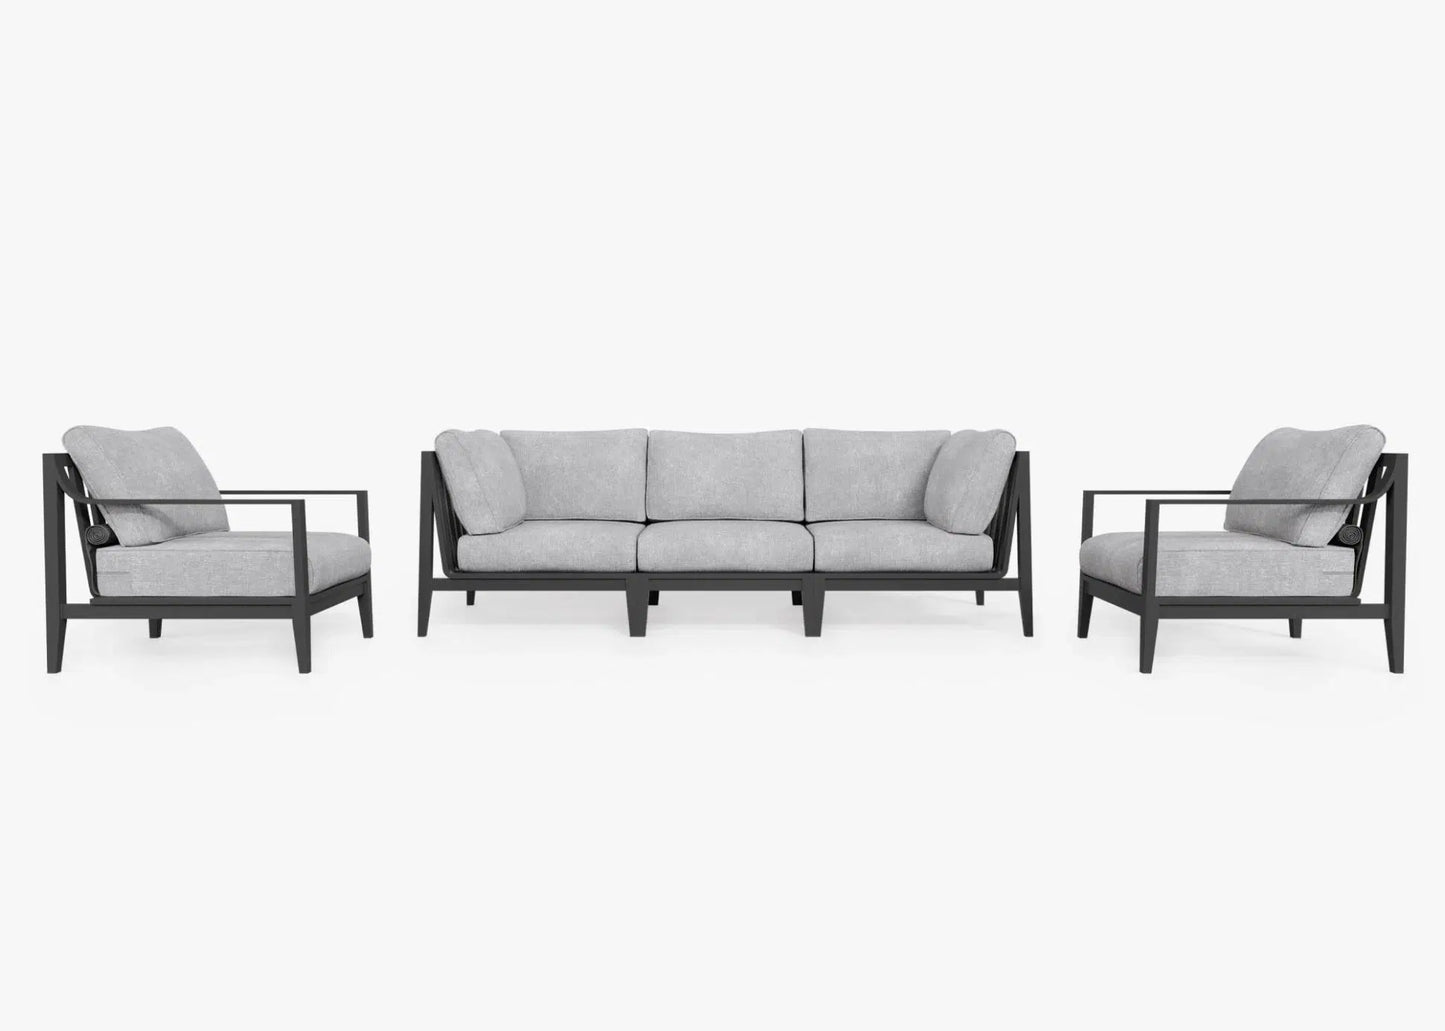 Live Outer 98" Charcoal Aluminum Outdoor Sofa With Armchairs and Pacific Fog Gray Cushion (5-Seat)